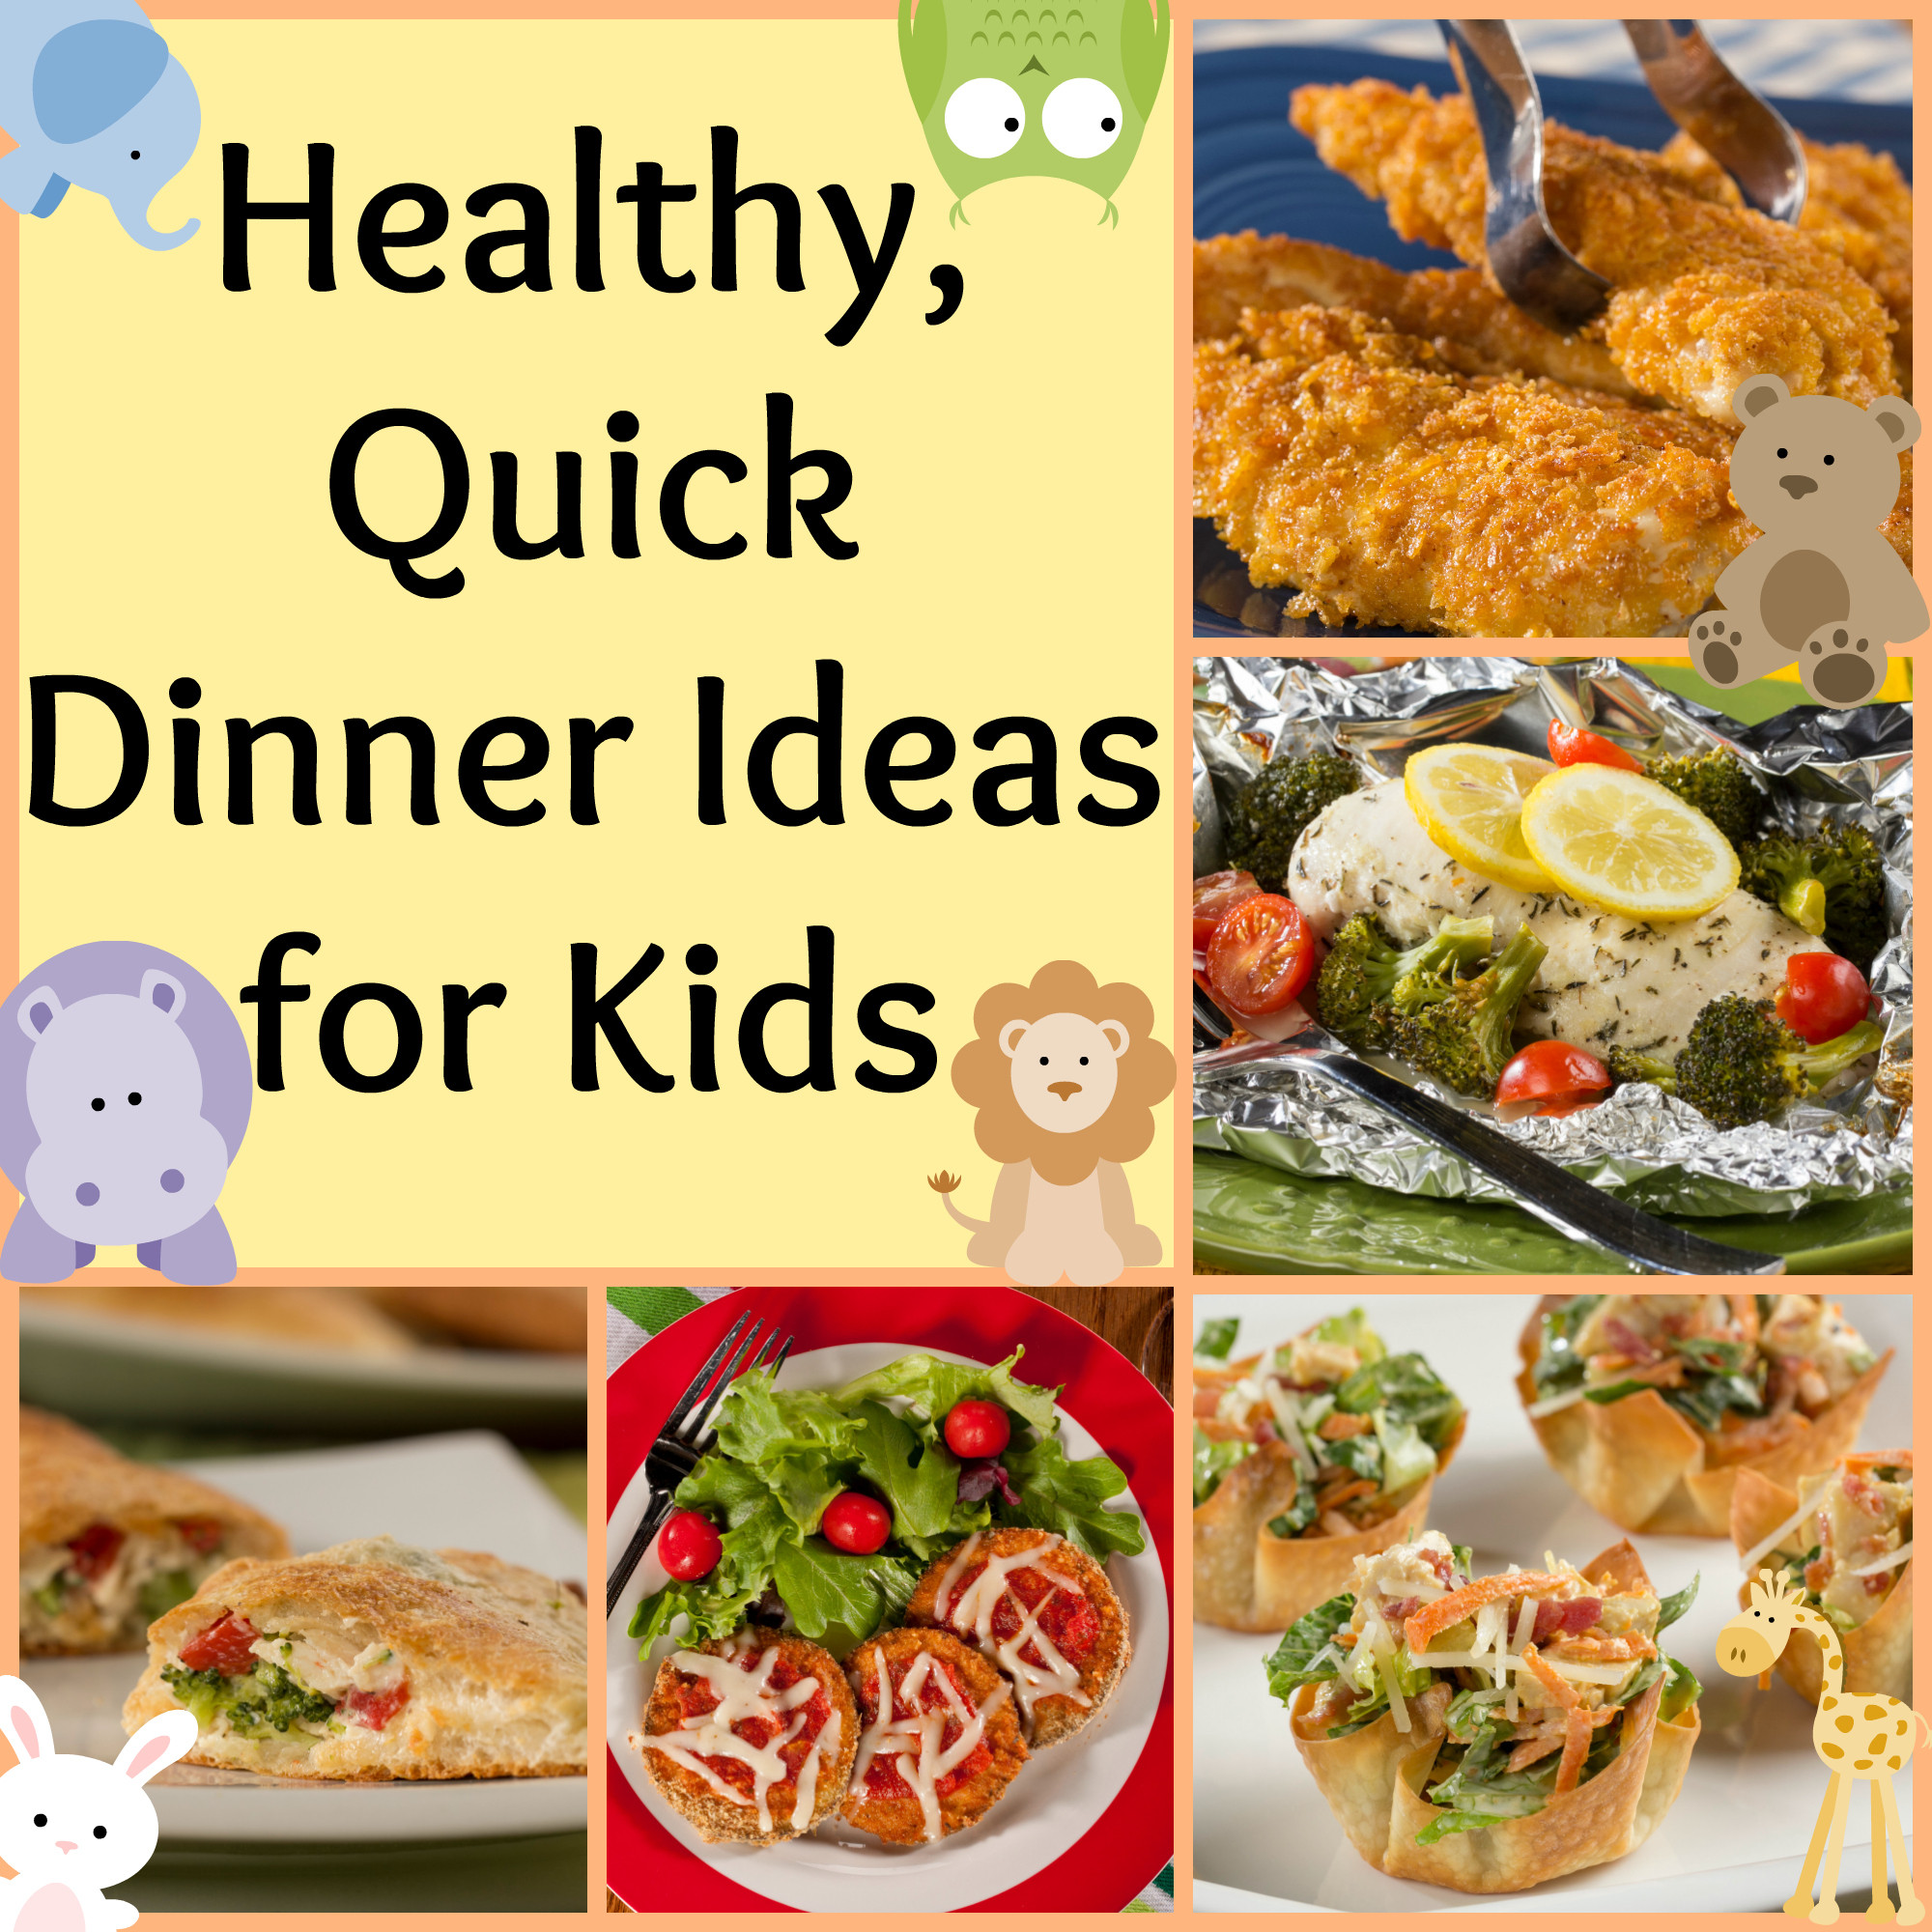 Healthy Dinner Recipes For Kids
 Healthy Quick Dinner Ideas for Kids Mr Food s Blog